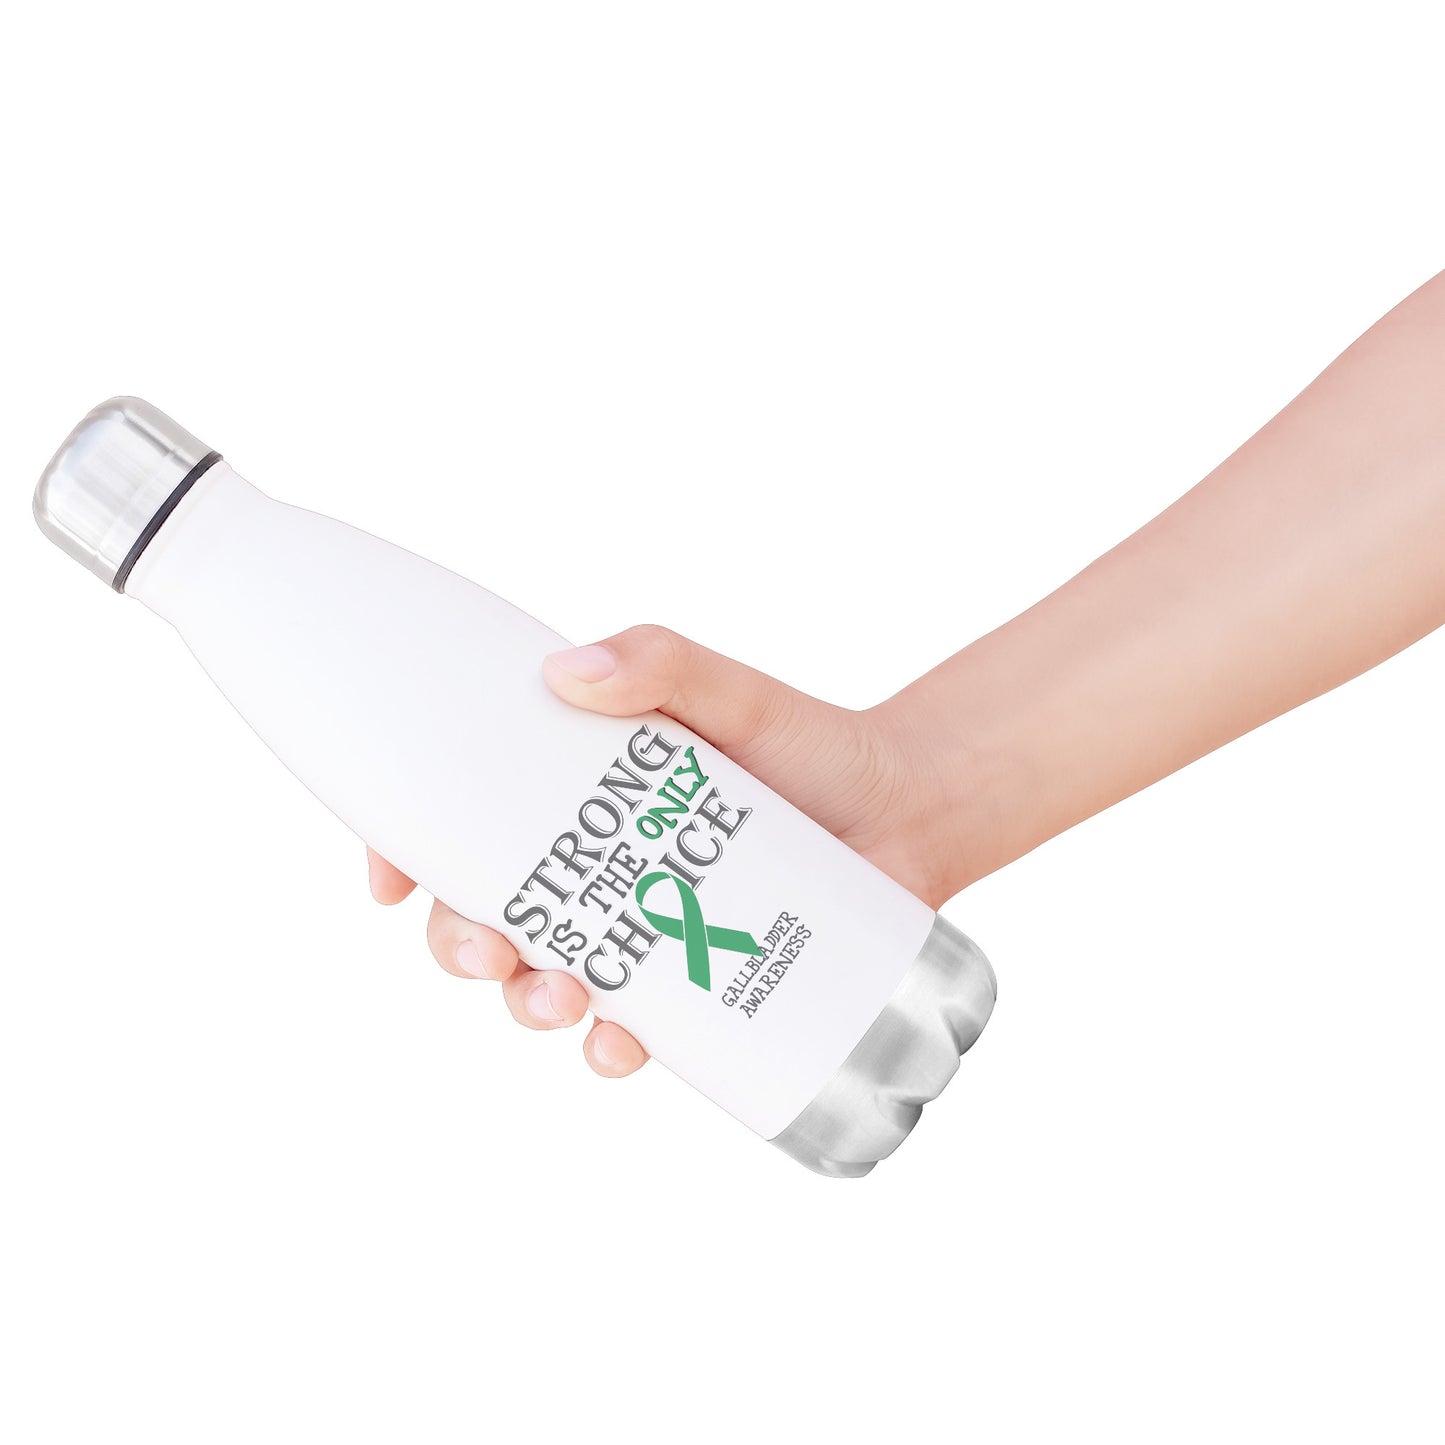 Strong is the Only Choice -Gallbladder Cancer Awareness 20oz Insulated Water Bottle